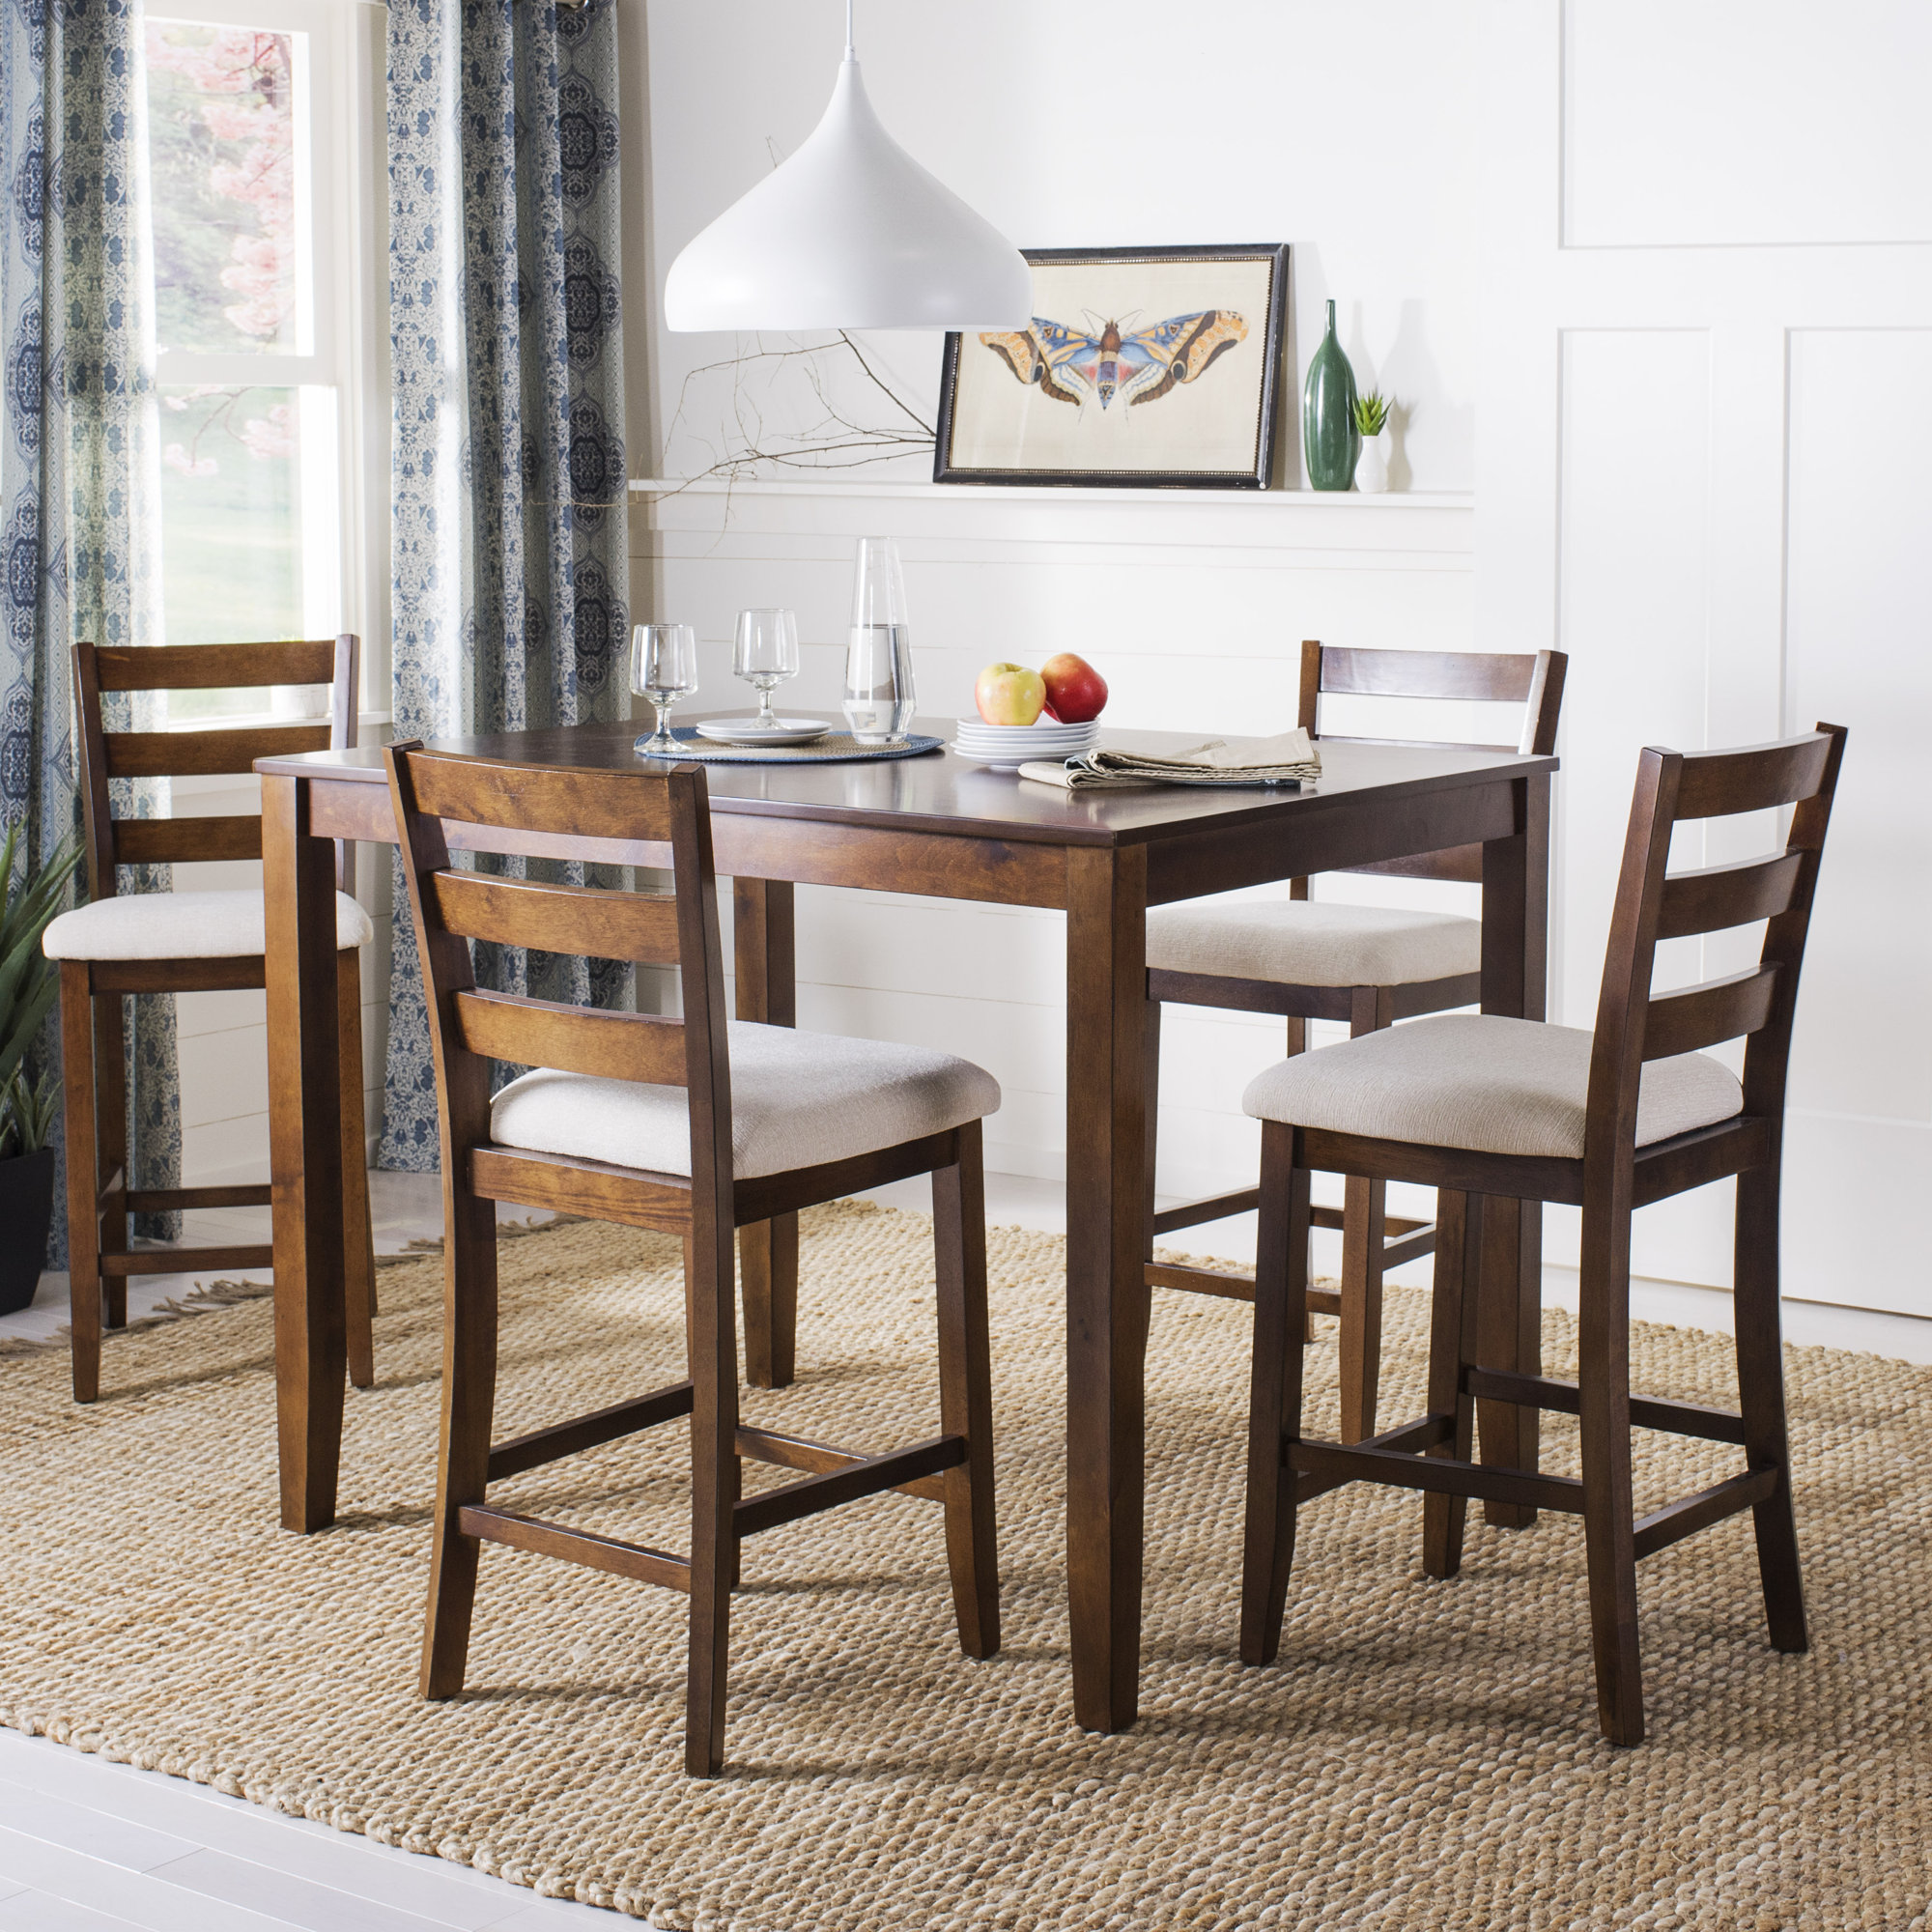 Donegal 5 Piece Dining Set